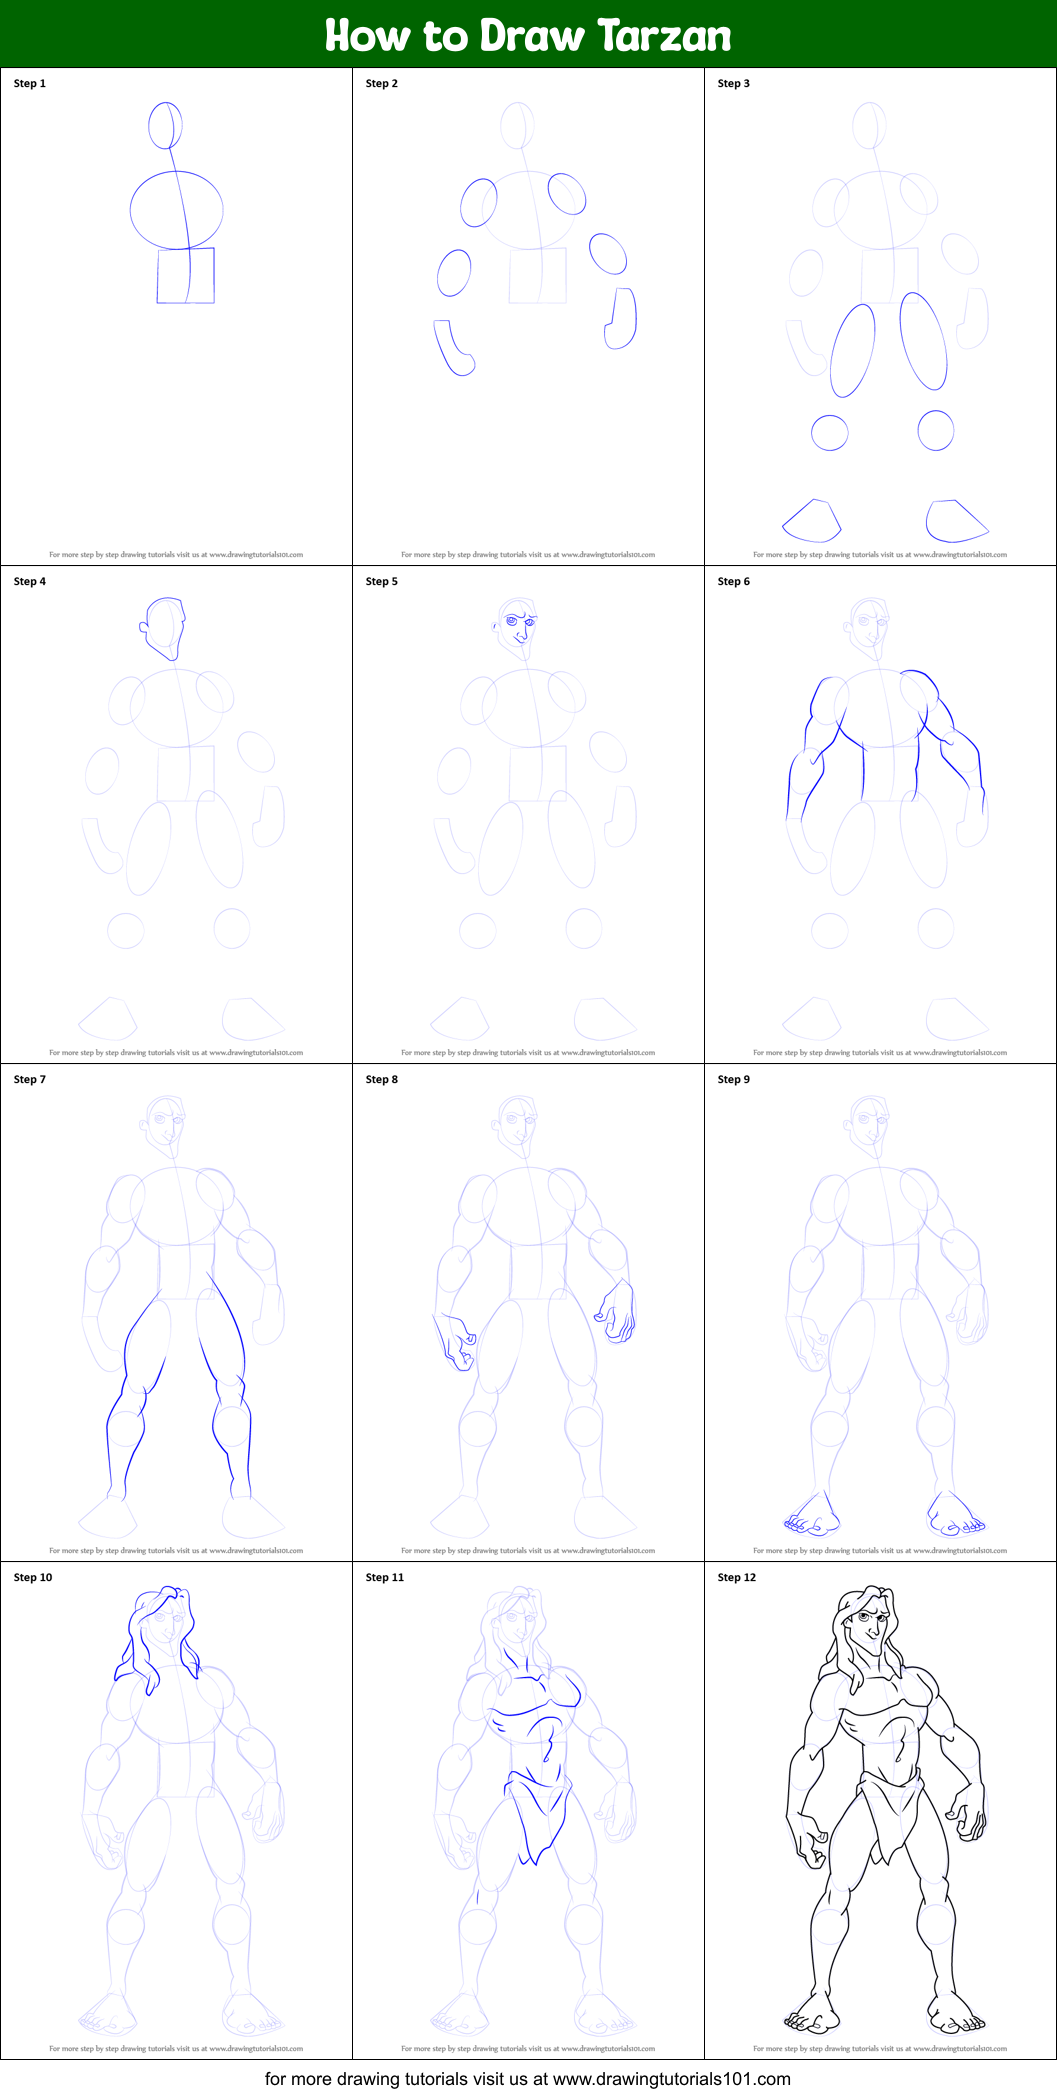 How To Draw Tarzan Printable Step By Step Drawing Sheet Drawingtutorials101 Com Start by drawing a circle near the top, right side of the page. how to draw tarzan printable step by